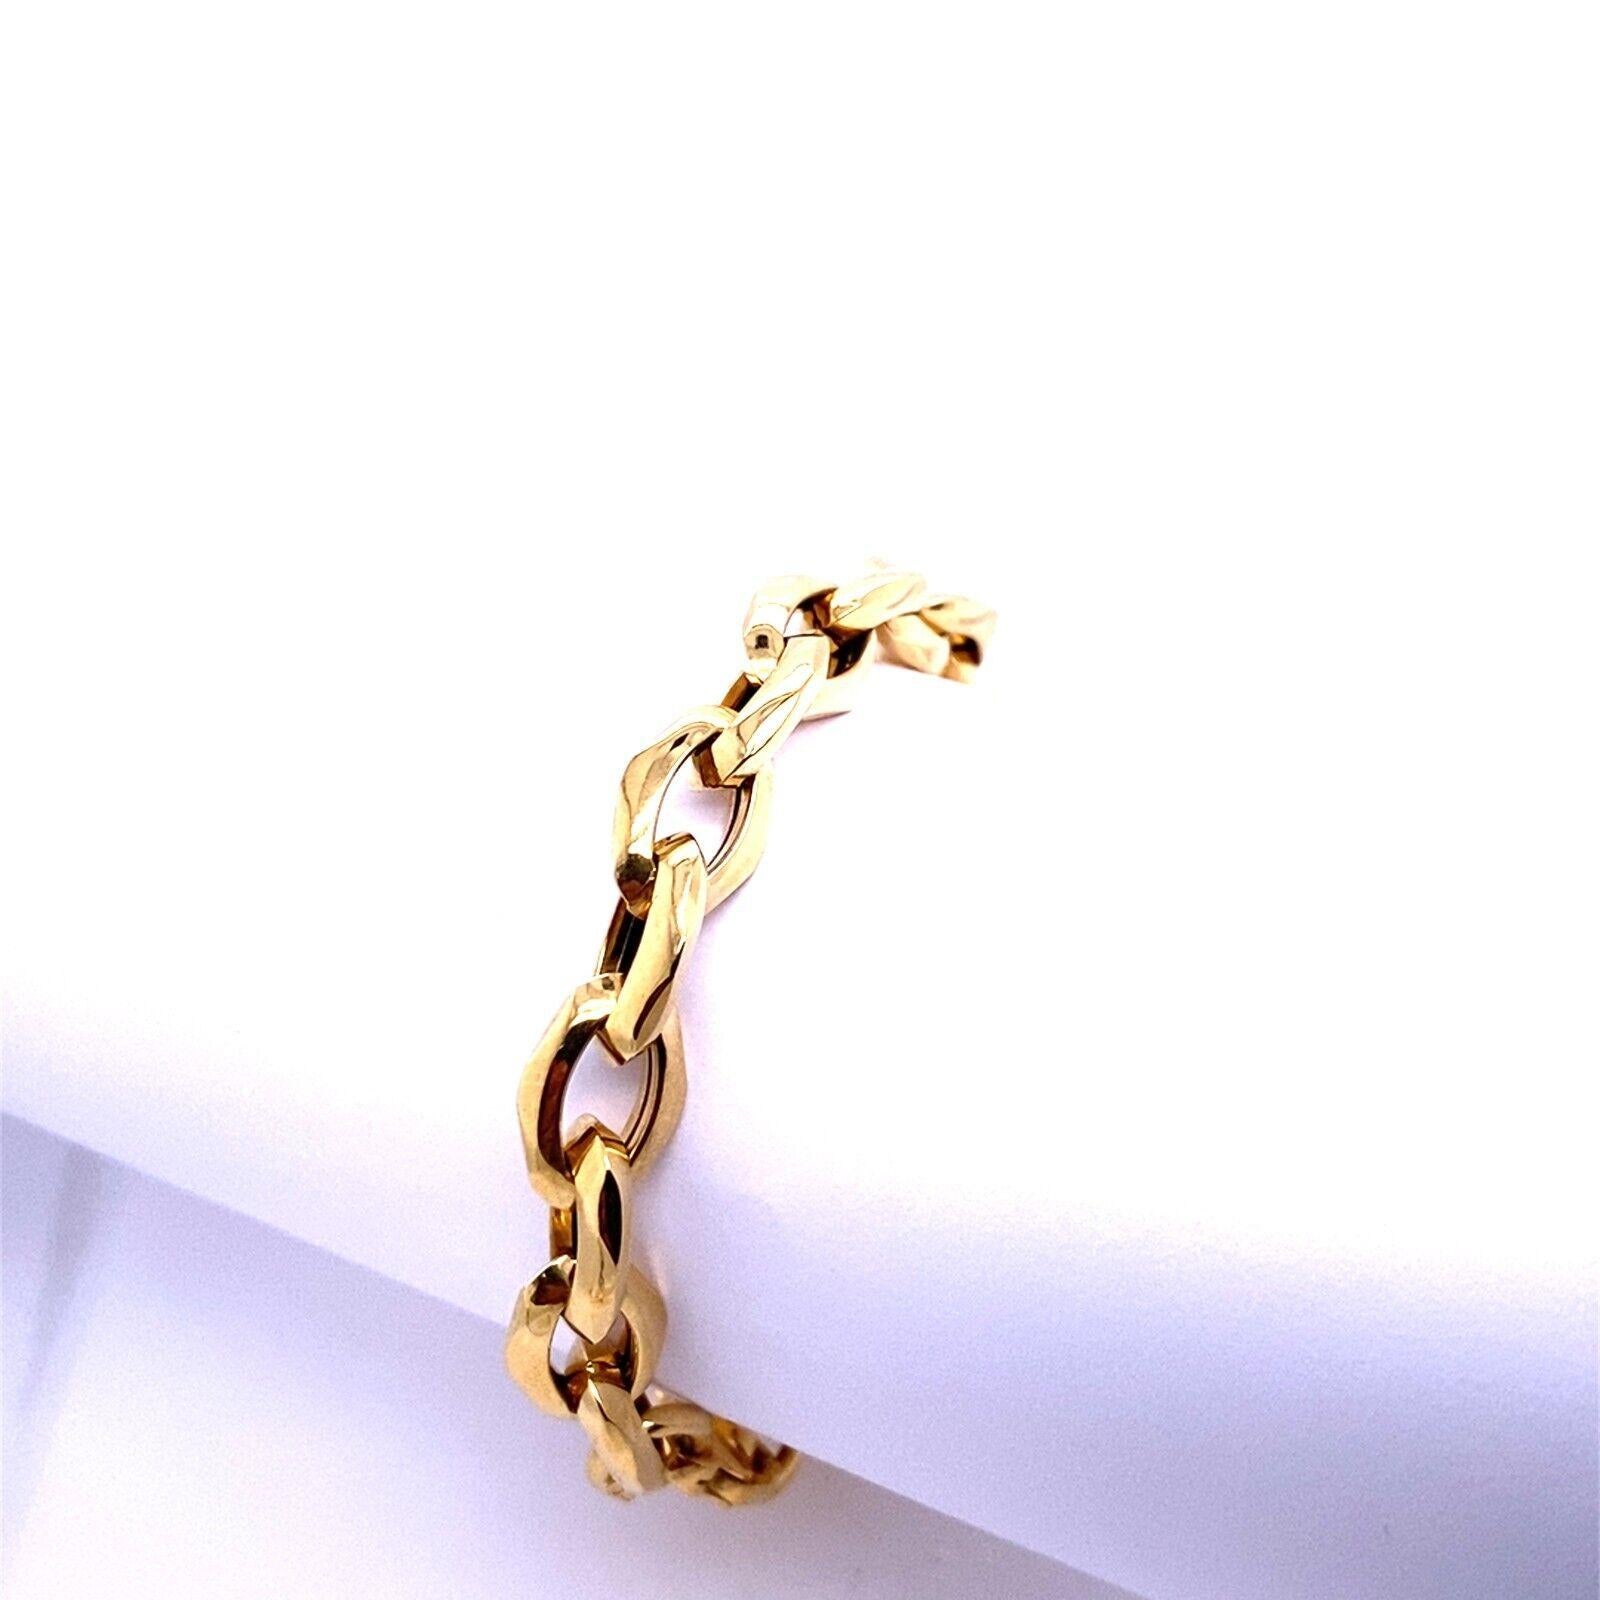 Bracelet with Lobster Clasp in 18ct Yellow Gold

A bracelet that will always be in style, thanks to its elegant design. The bracelet is made from 18ct Yellow Gold and has a lobster clasp.

Additional Information:
Bracelet Length: 7 1/4''
Bracelet